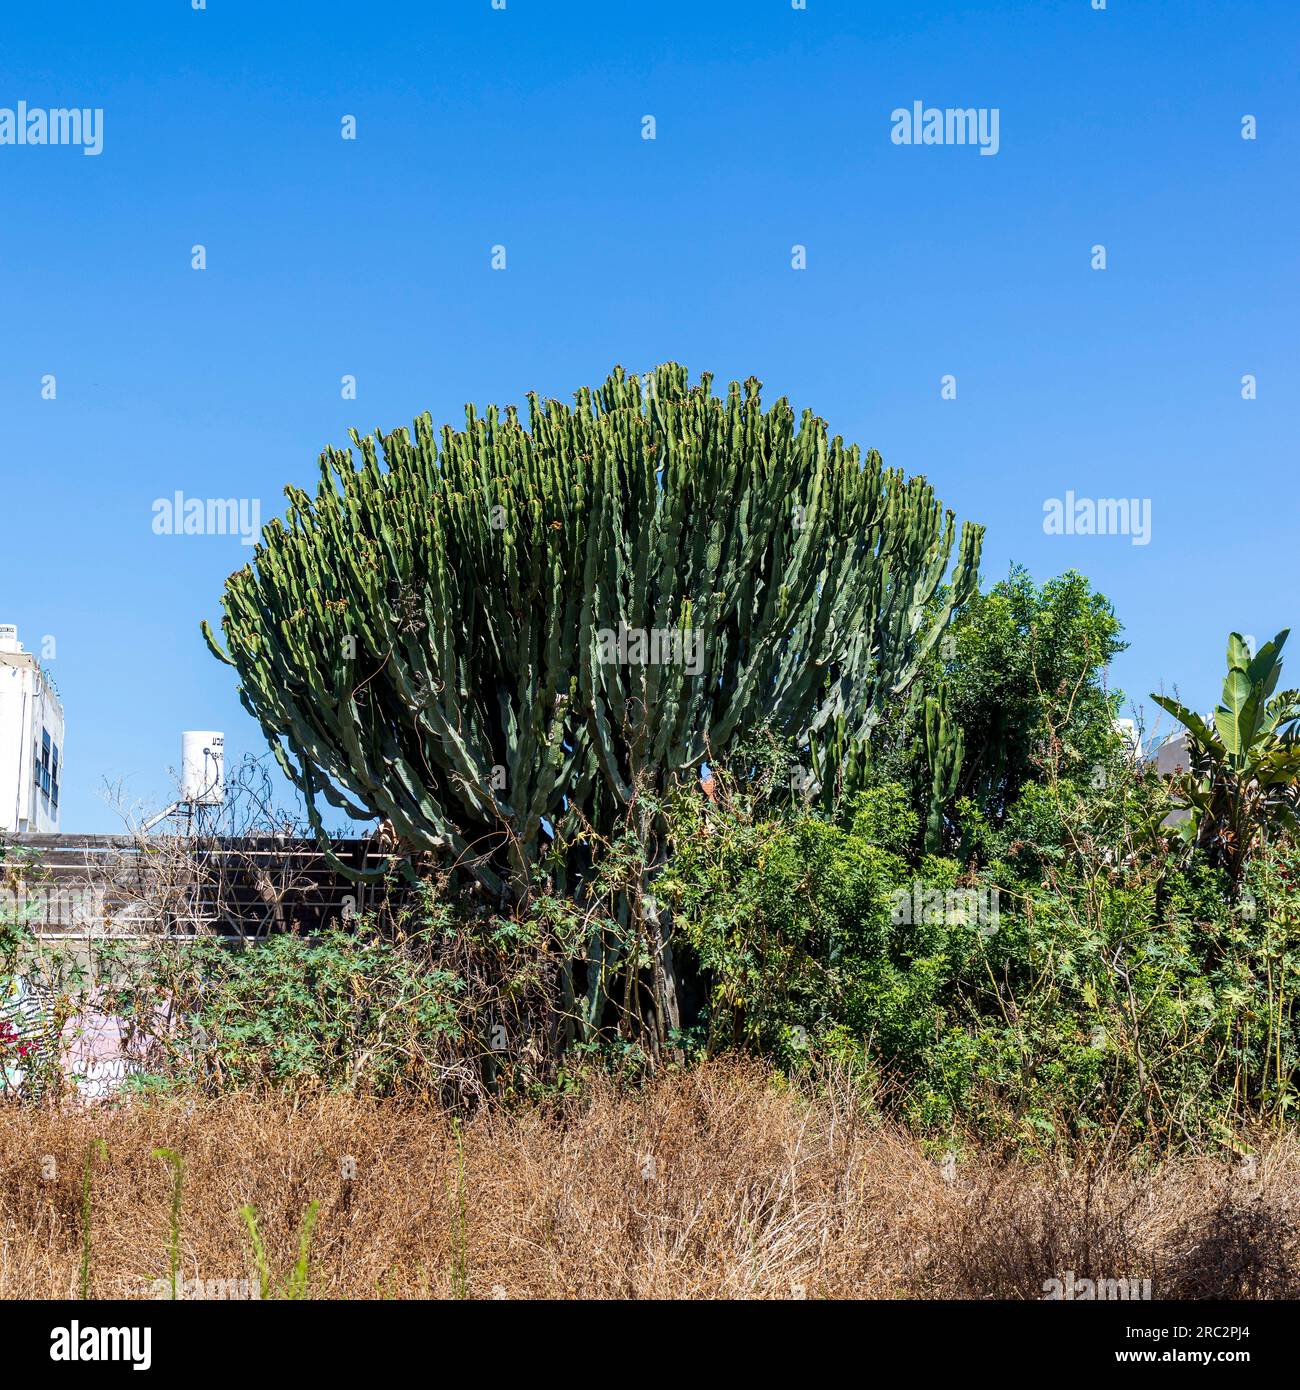 Peruvian cereus tree cactus in the courtyard of the house against the blue sky. Tel Aviv, Israel Stock Photo